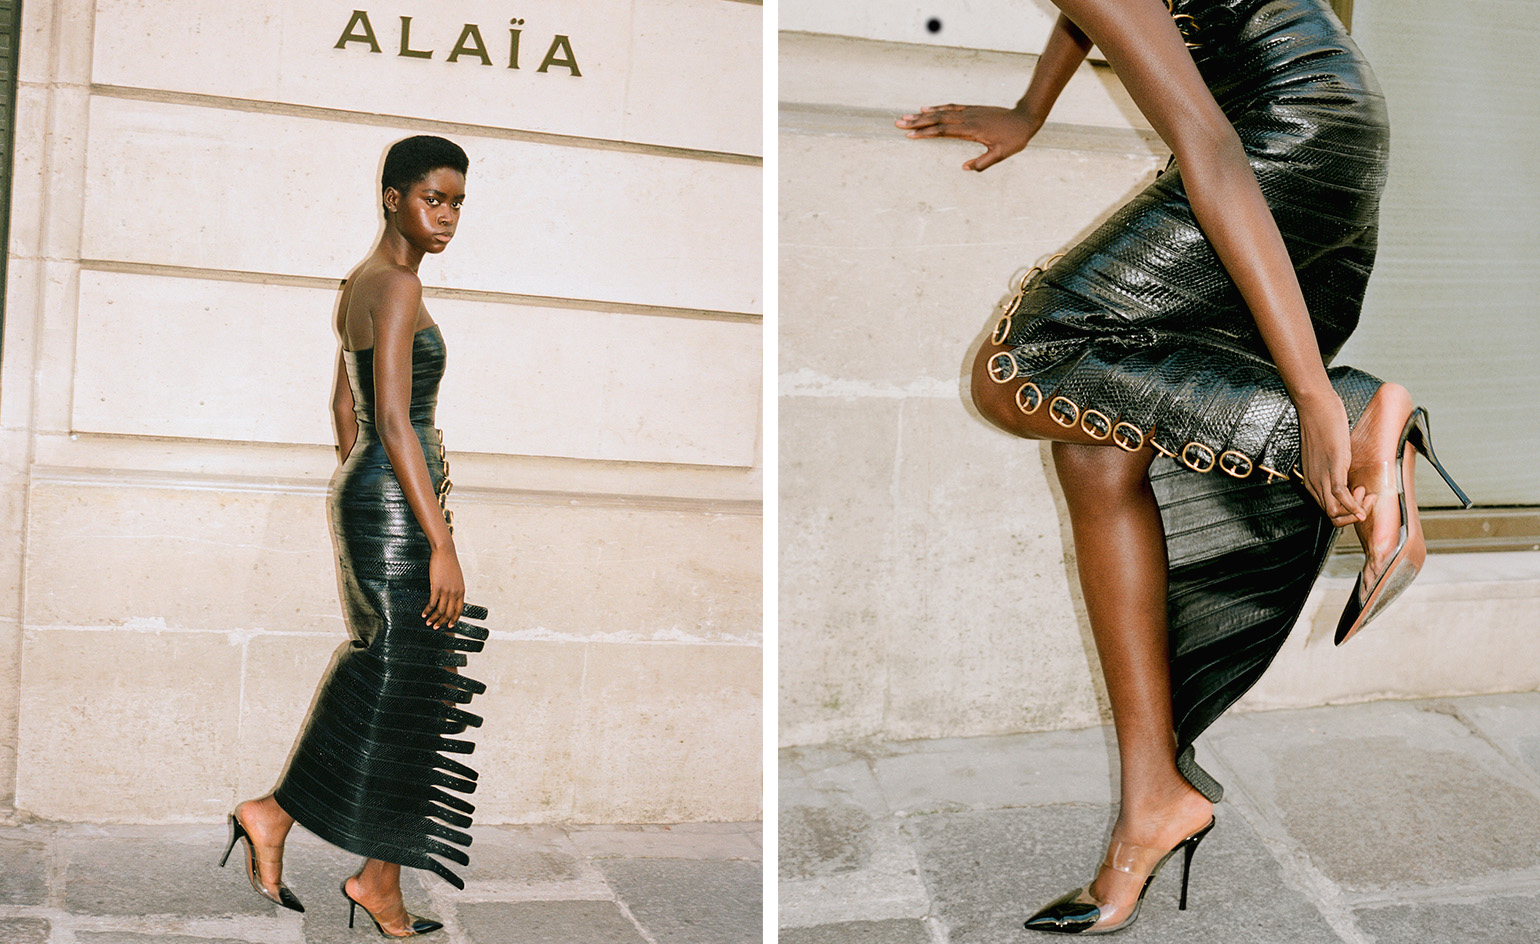 Modern beauty: Pieter Mulier on his vision for Alaïa